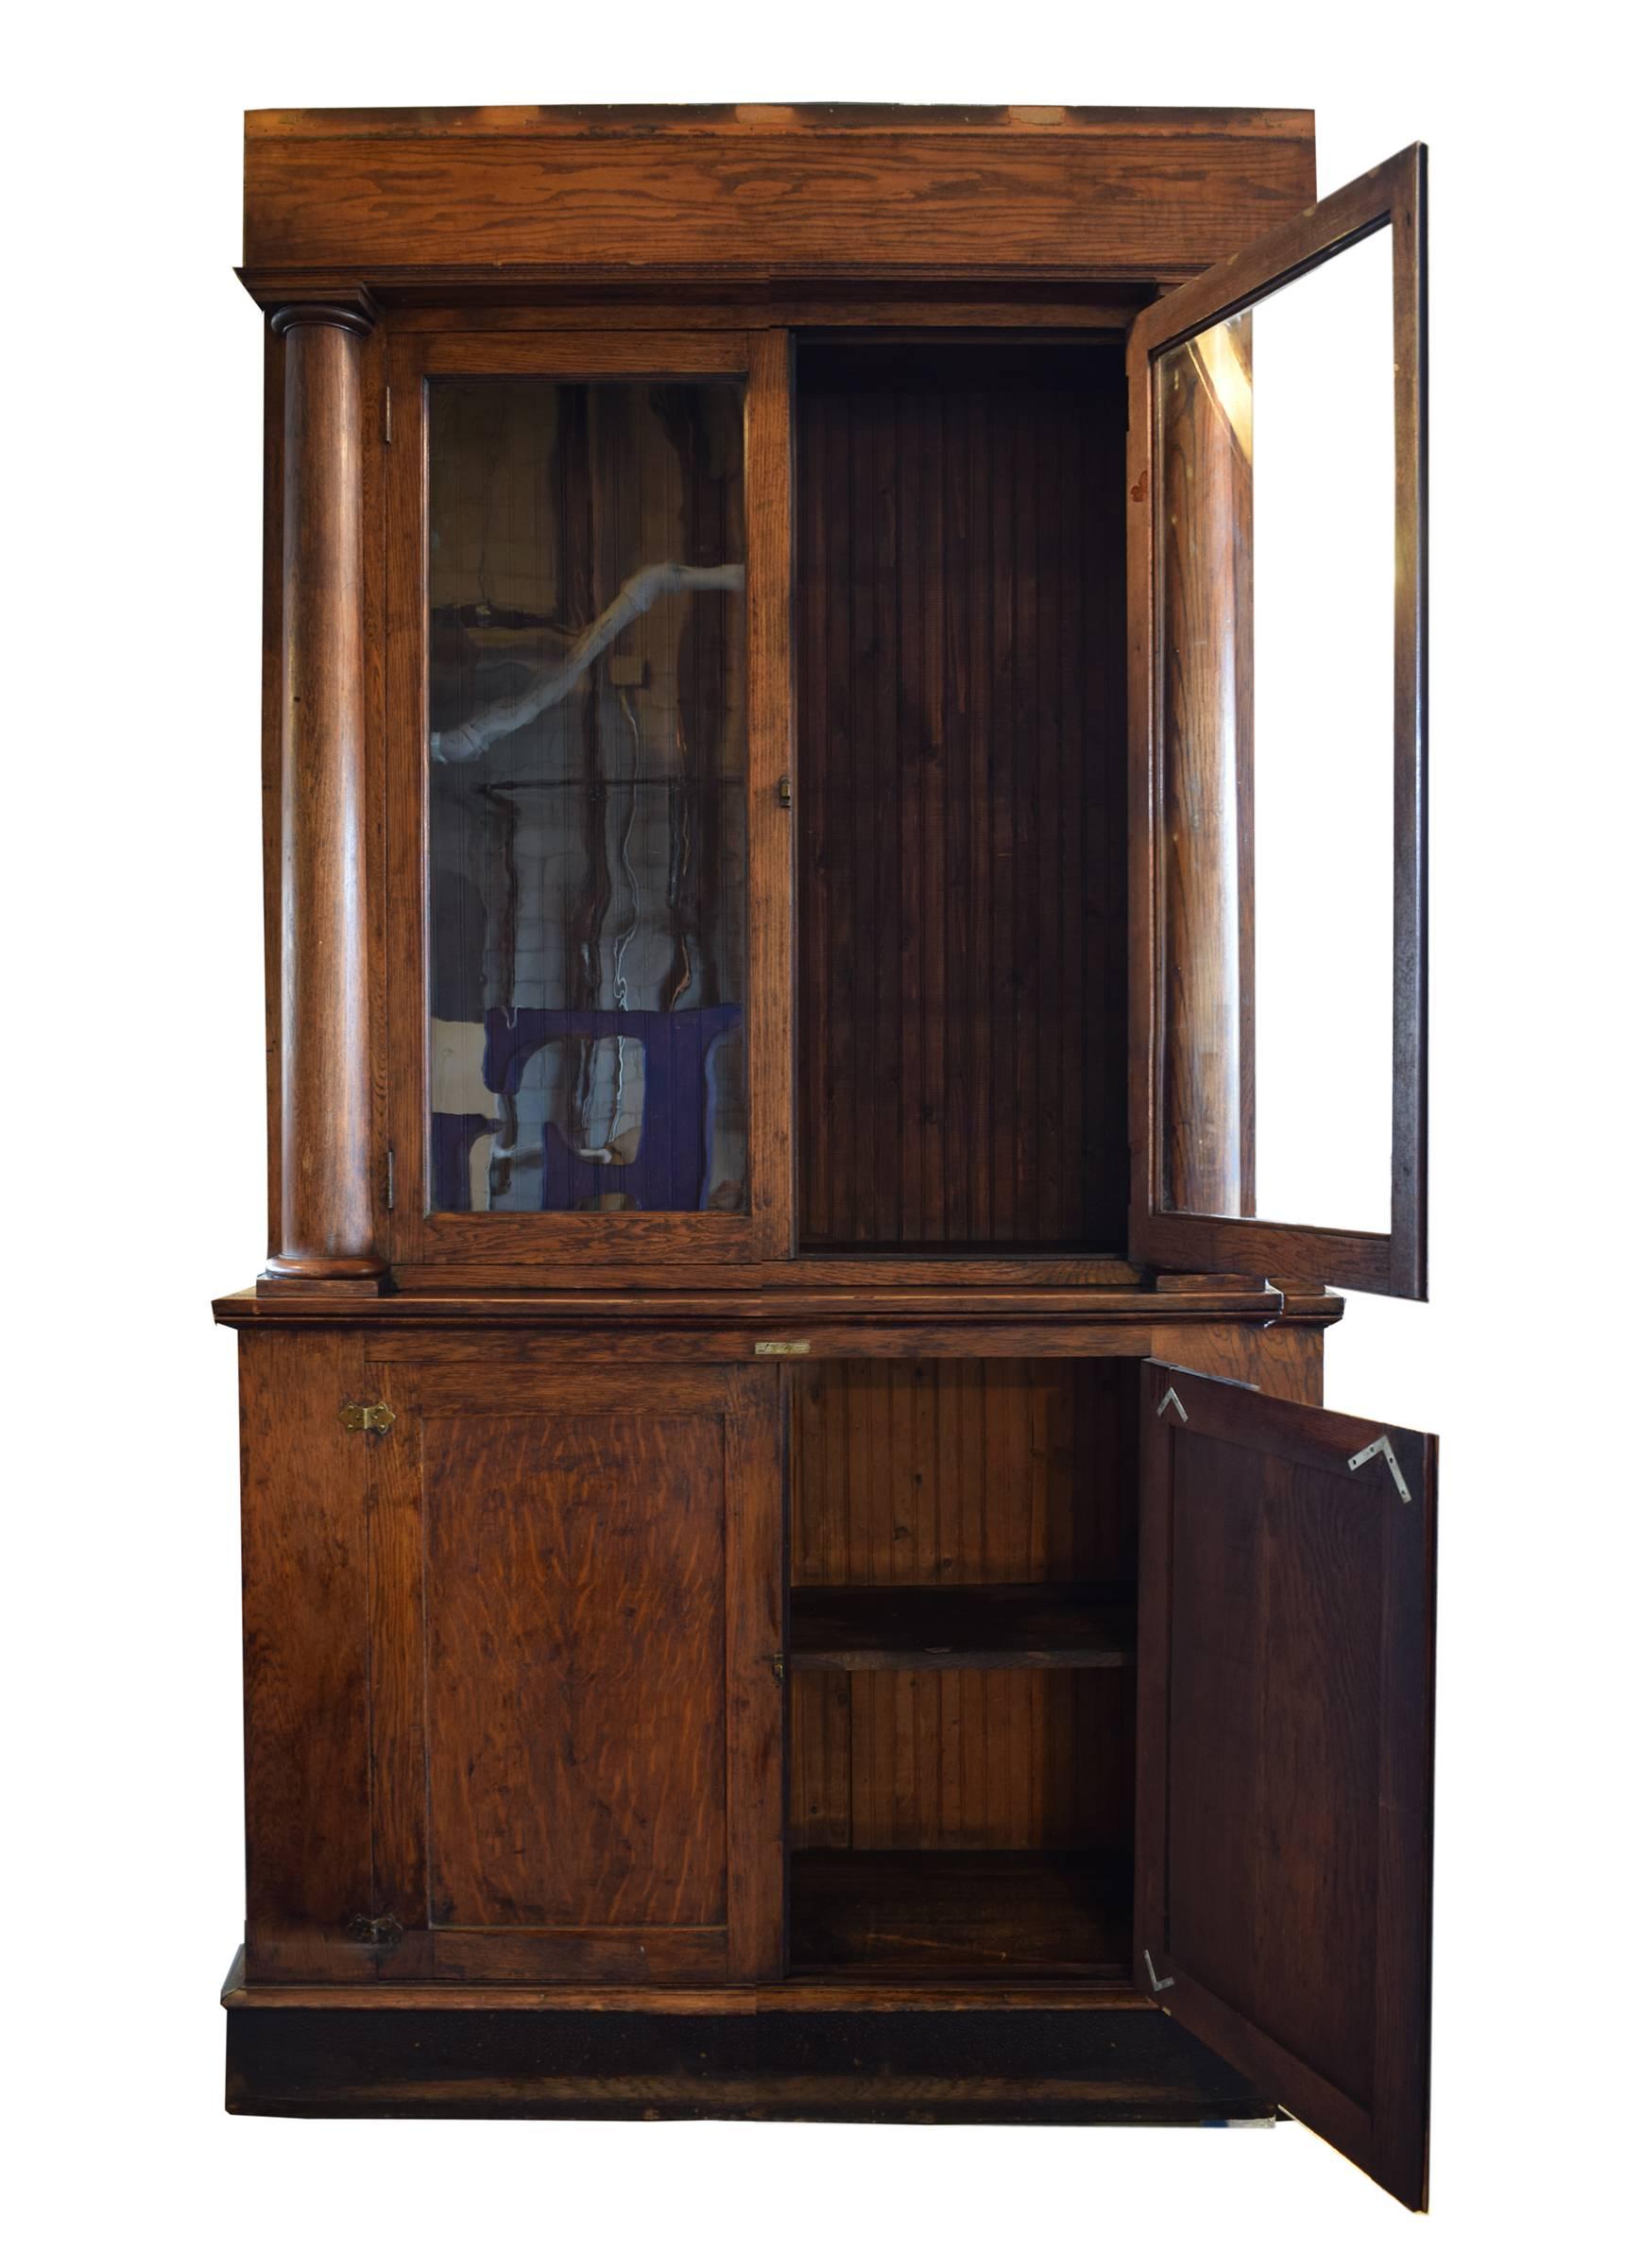 An American oak liquor cabinet by Brunswick furniture from a Chicago saloon. The cabinet features two top doors with original glass and two lower oak doors that open to a deep storage space with a shelf. Details include pillars and brass hardware.